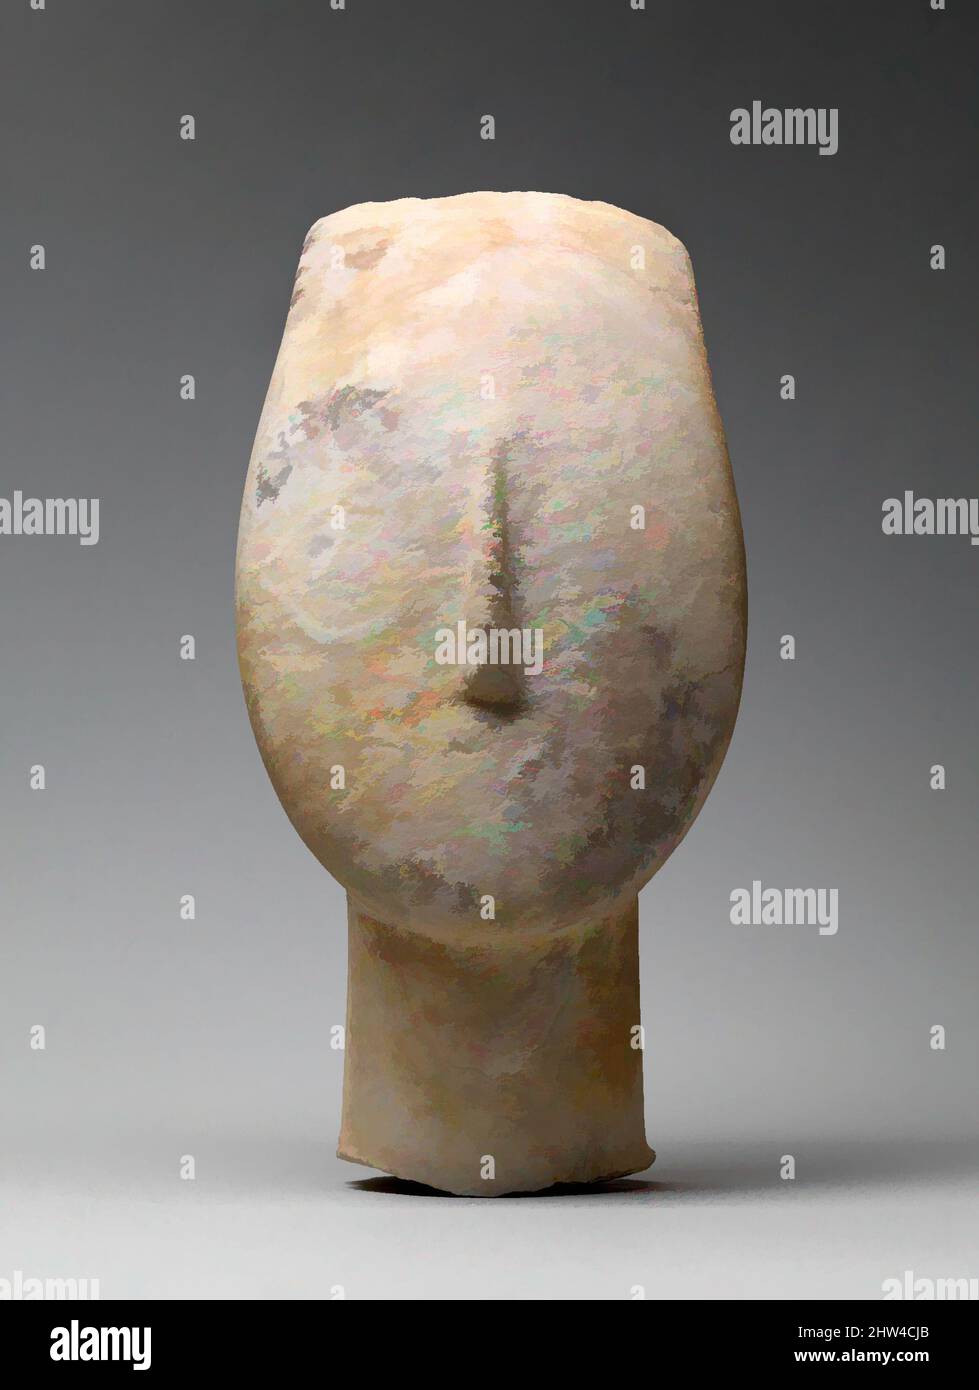 Art inspired by Marble head from the figure of a woman, Early Cycladic II, 2700–2500 B.C., Cycladic, Marble, H. 9 15/16 in. (25.3 cm), Stone Sculpture, The traces of eyes, in extremely low relief, indicate that they originally were rendered with pigment. The painted marble weathered, Classic works modernized by Artotop with a splash of modernity. Shapes, color and value, eye-catching visual impact on art. Emotions through freedom of artworks in a contemporary way. A timeless message pursuing a wildly creative new direction. Artists turning to the digital medium and creating the Artotop NFT Stock Photo